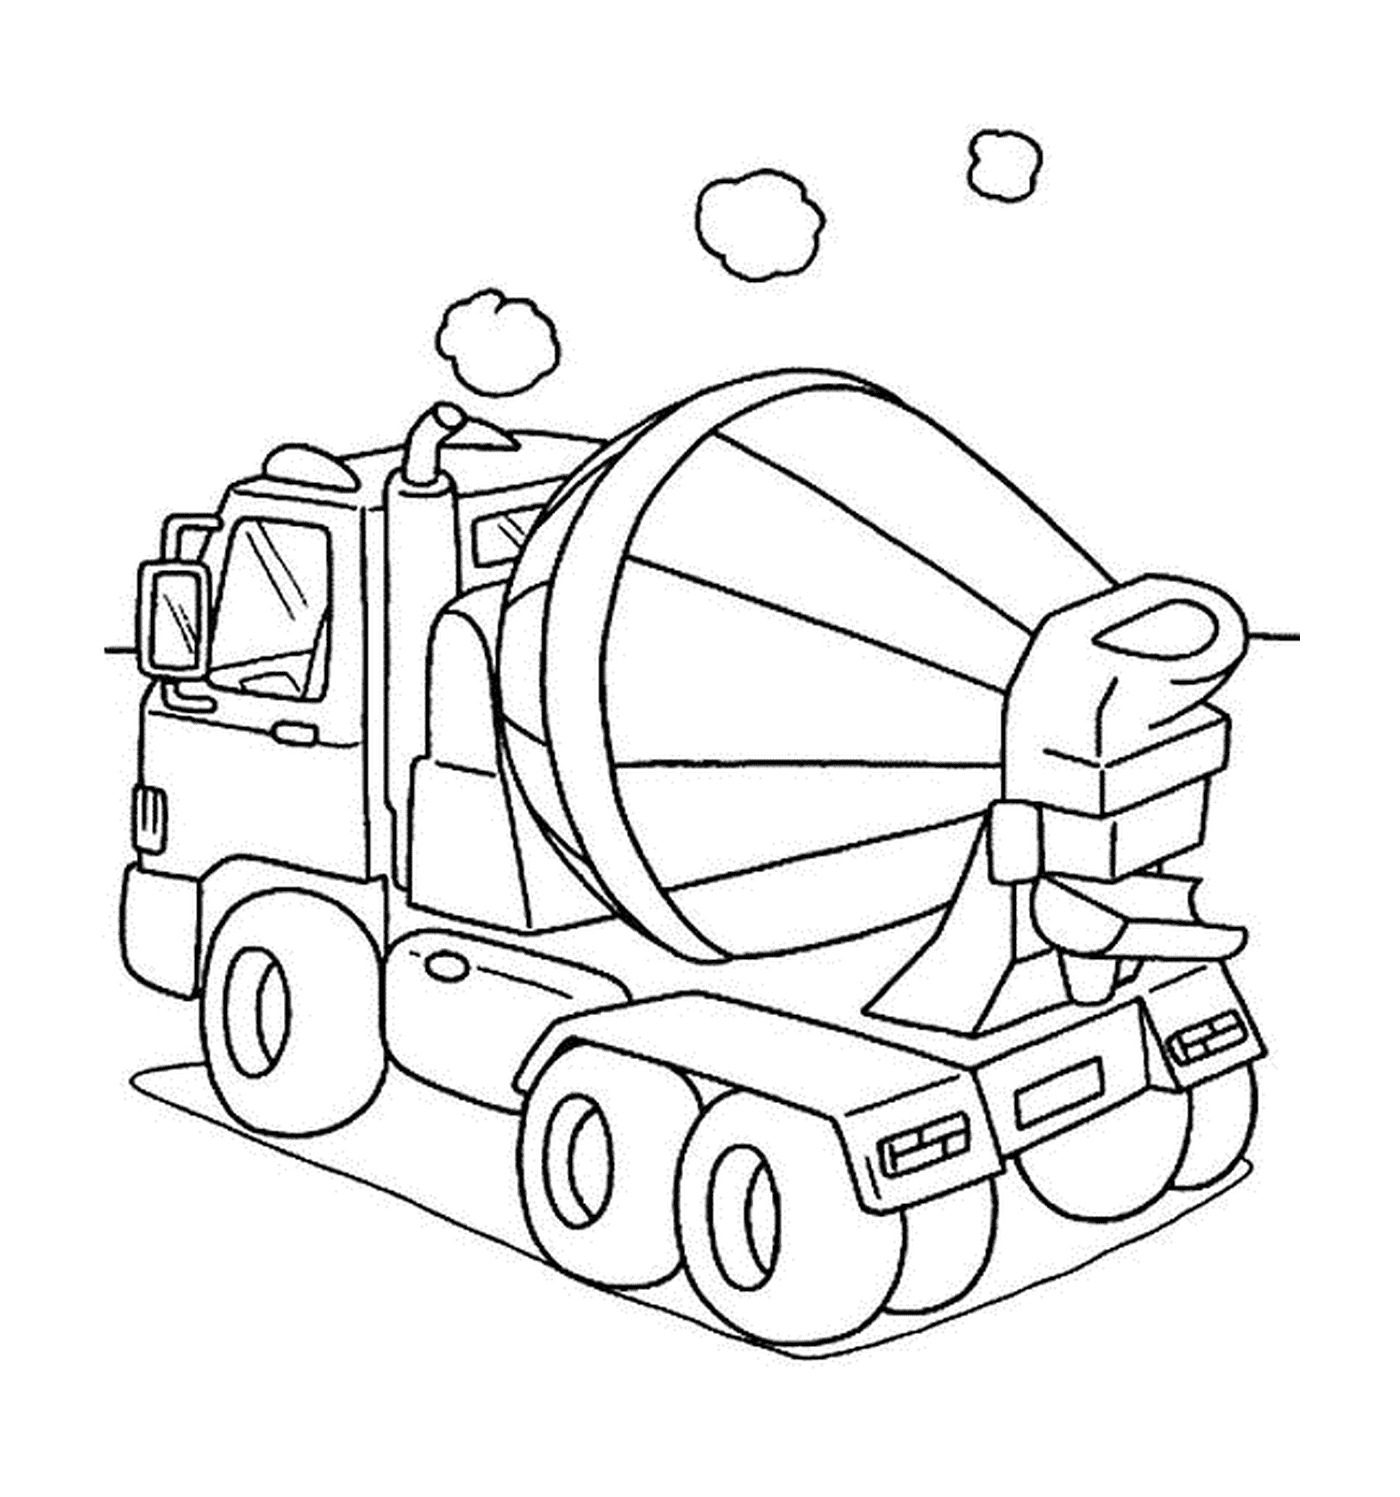  A concrete mixer in this image 